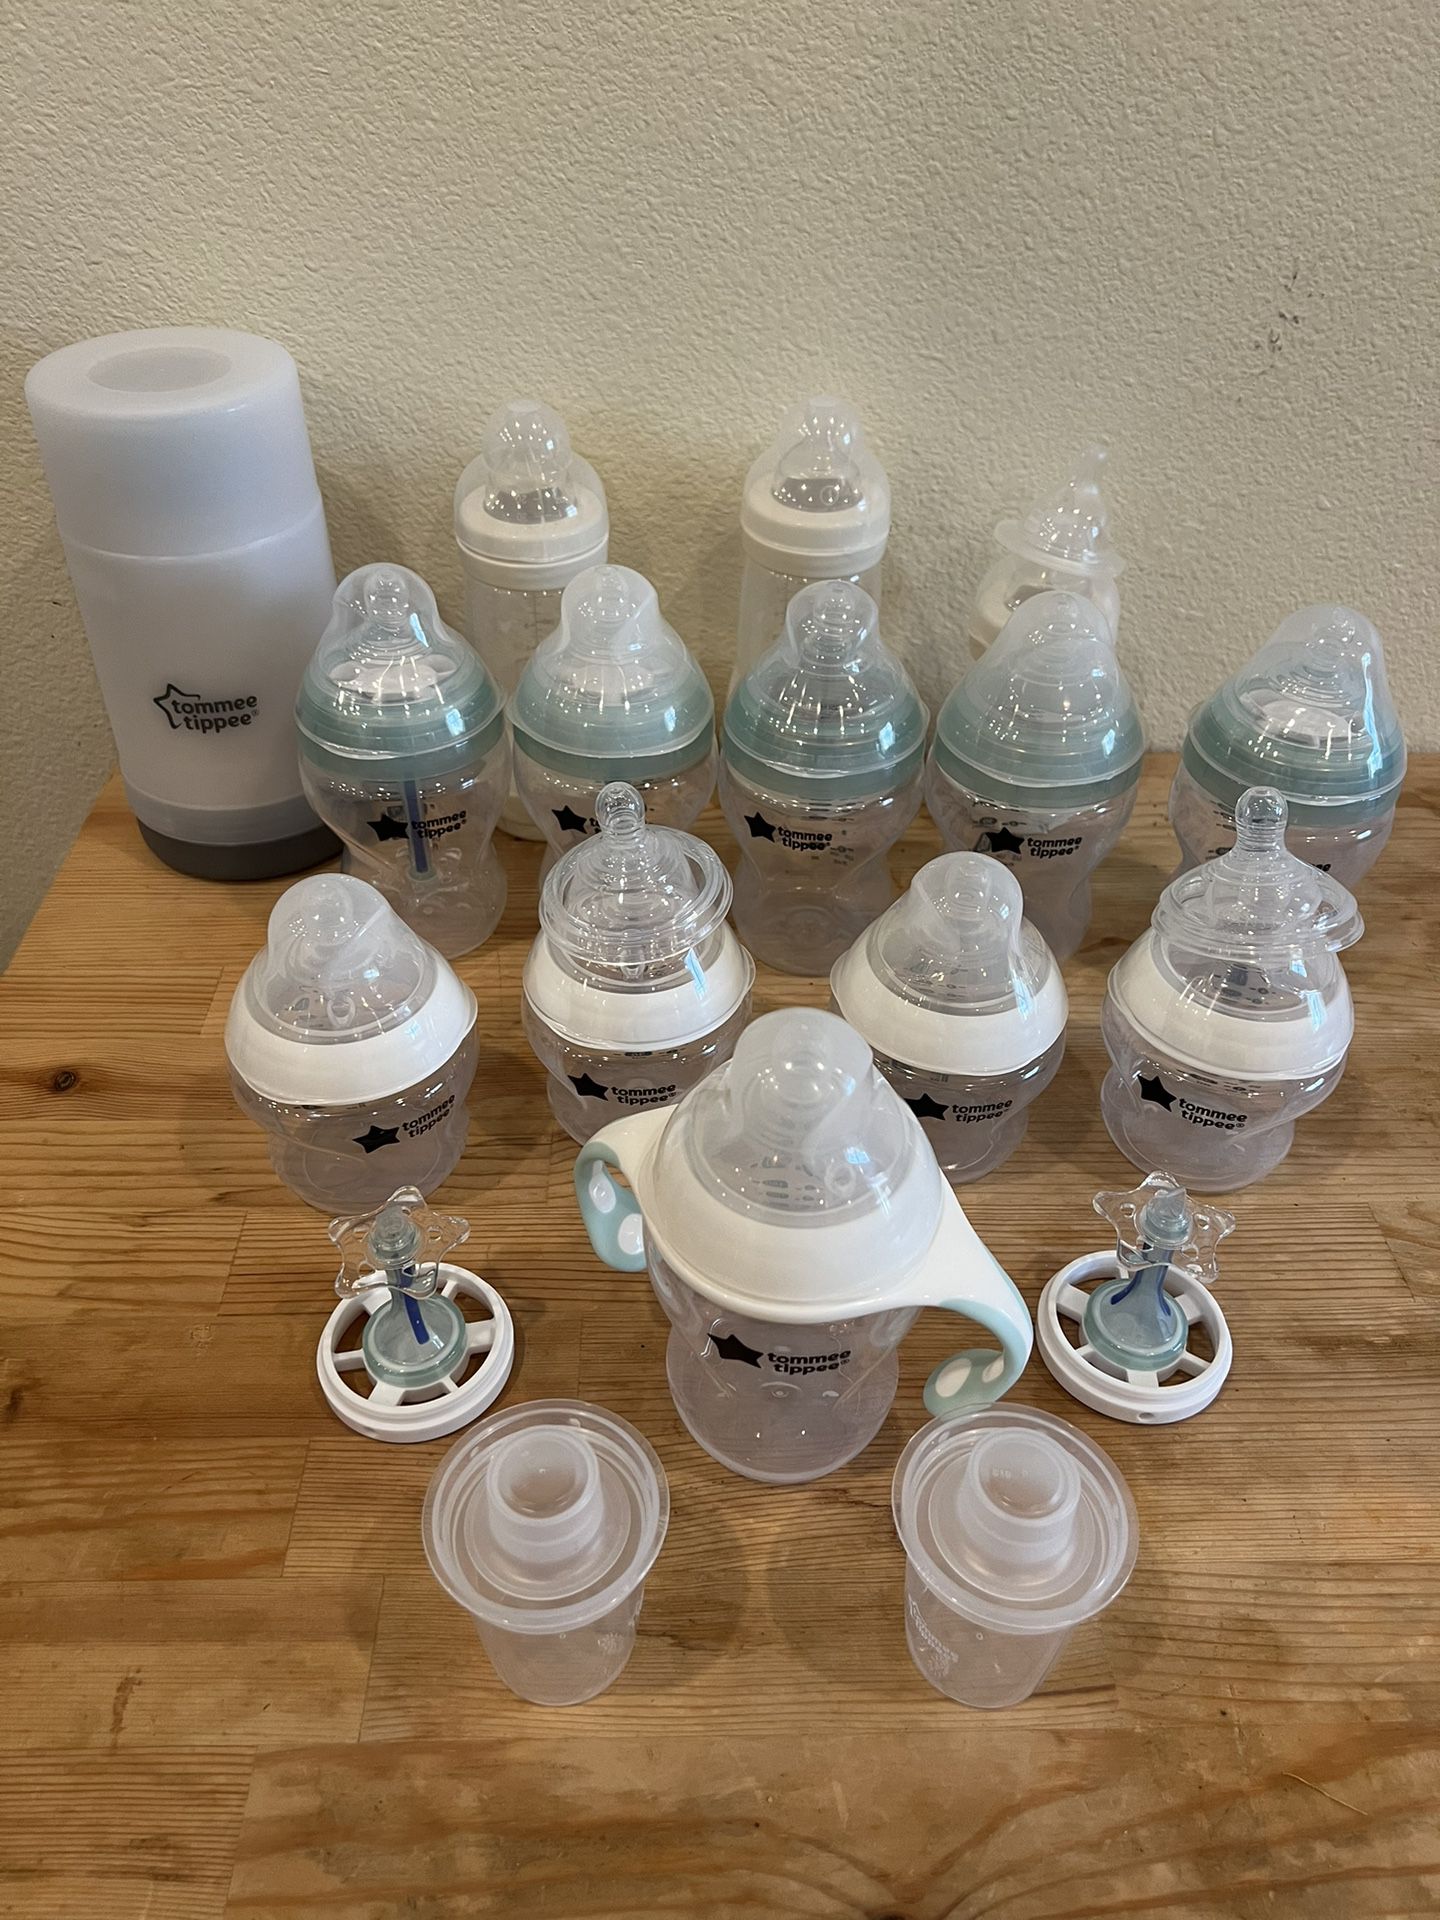 NEW! Tommie Tippee Bottle Kit Collection With Two Bottle Warmers